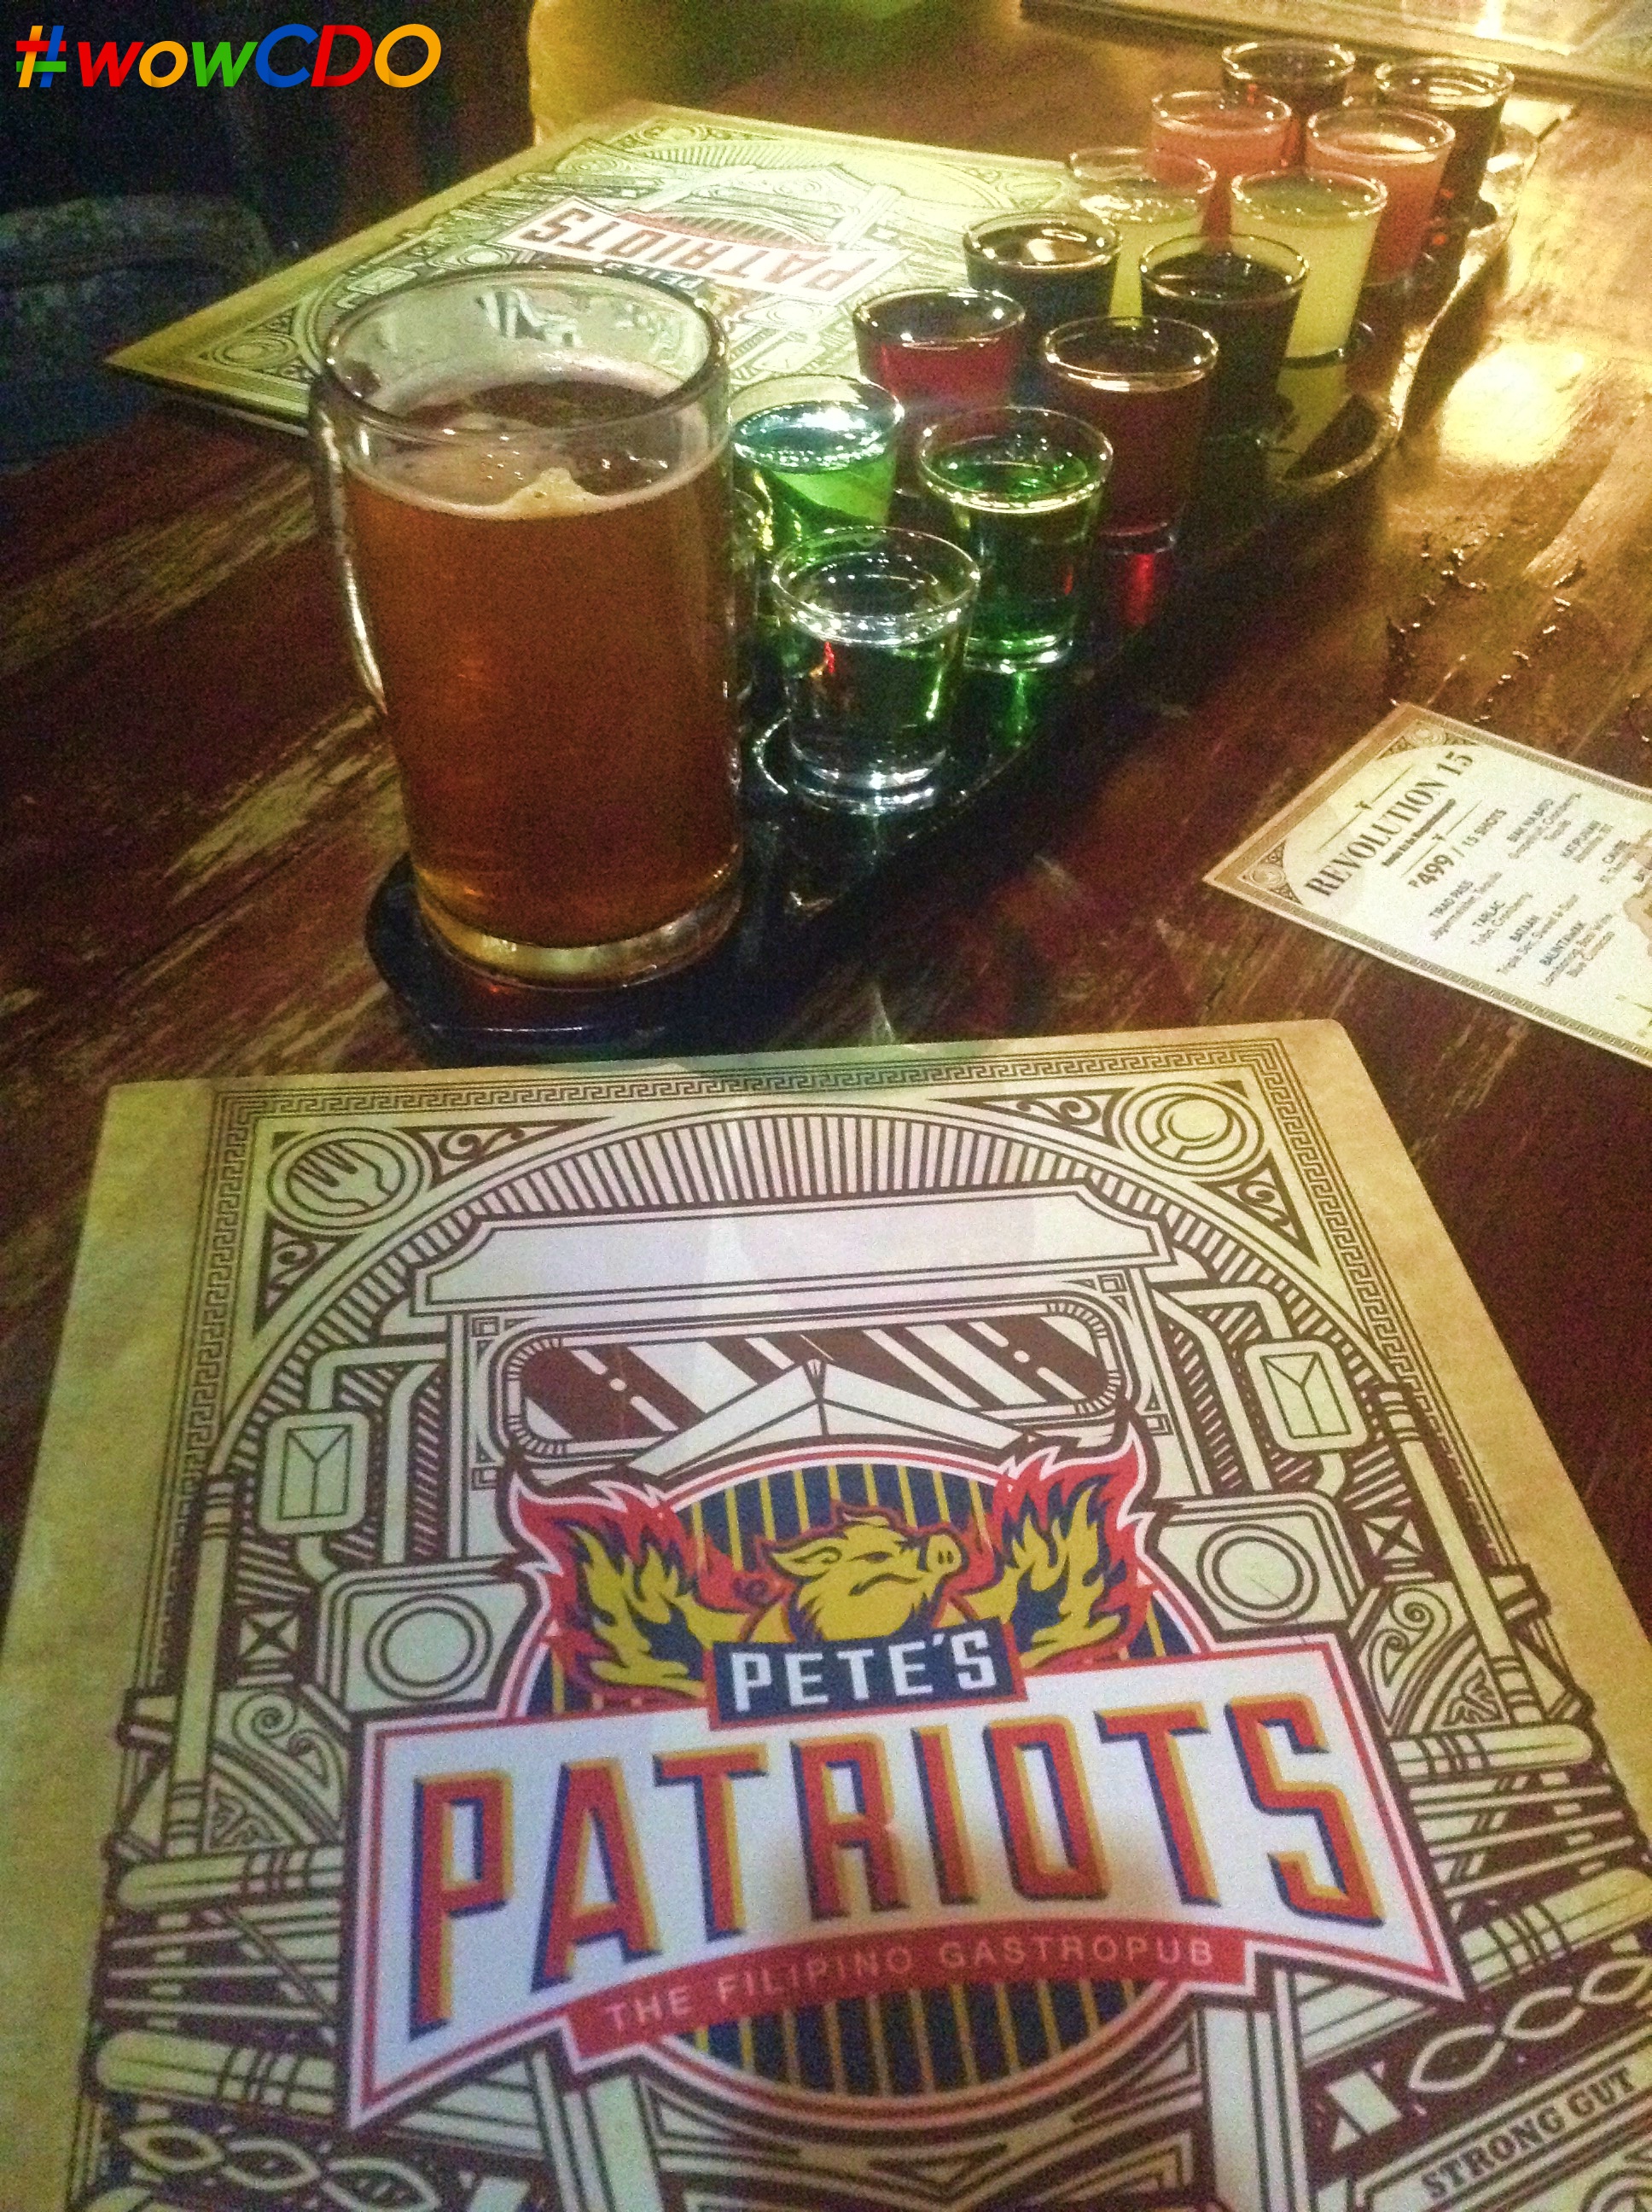 Pete’s Patriots launches Revolution 15 Shots and Lunch Meals